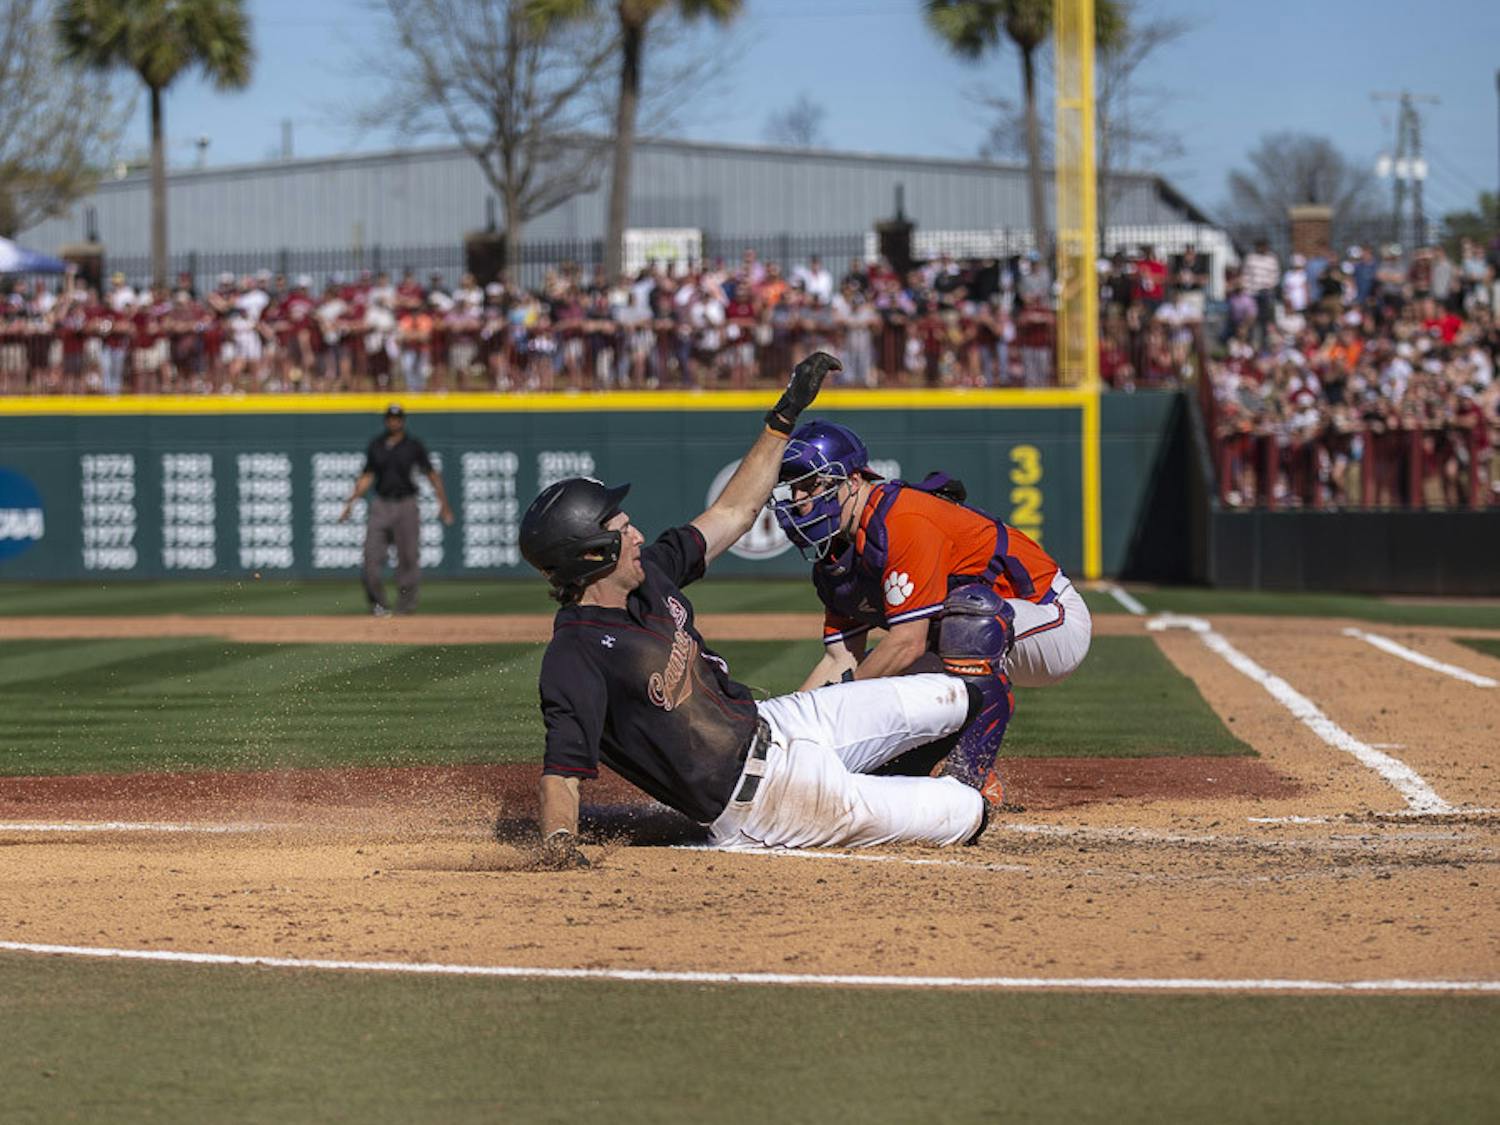 Senior infielder Braylen Wimmer slides into home plate, scoring a run for South Carolina in the fifth inning against Clemson at Founders Park on March 5, 2023. The Gamecocks beat the Tigers 7-1, taking the series 2-1.